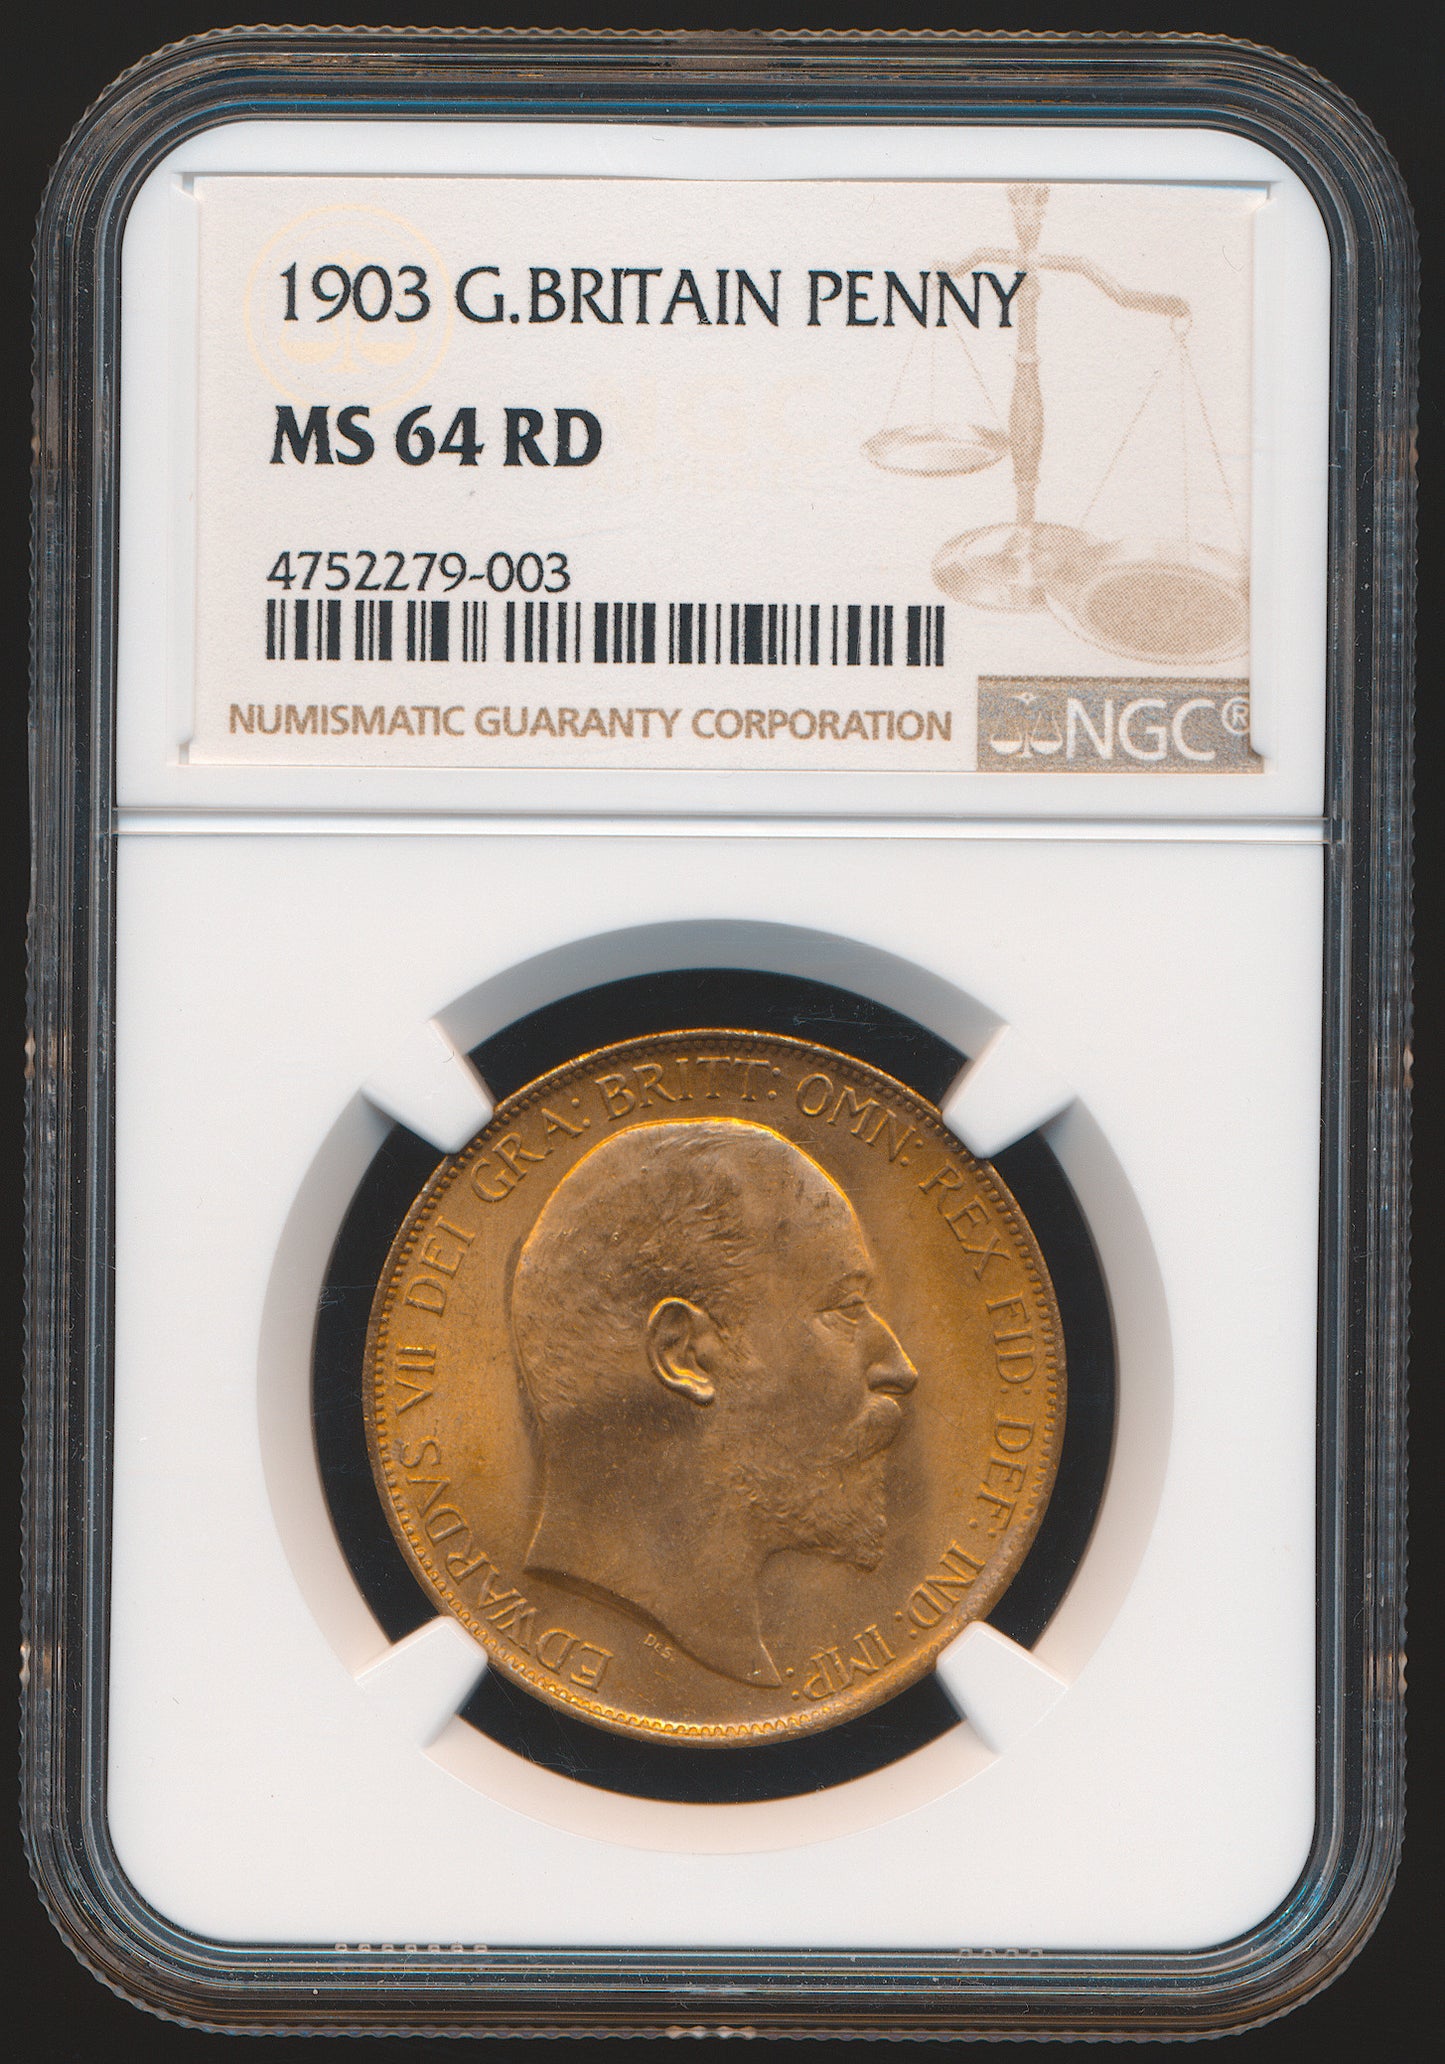 1903 Penny S3990 F158 UNC MS64